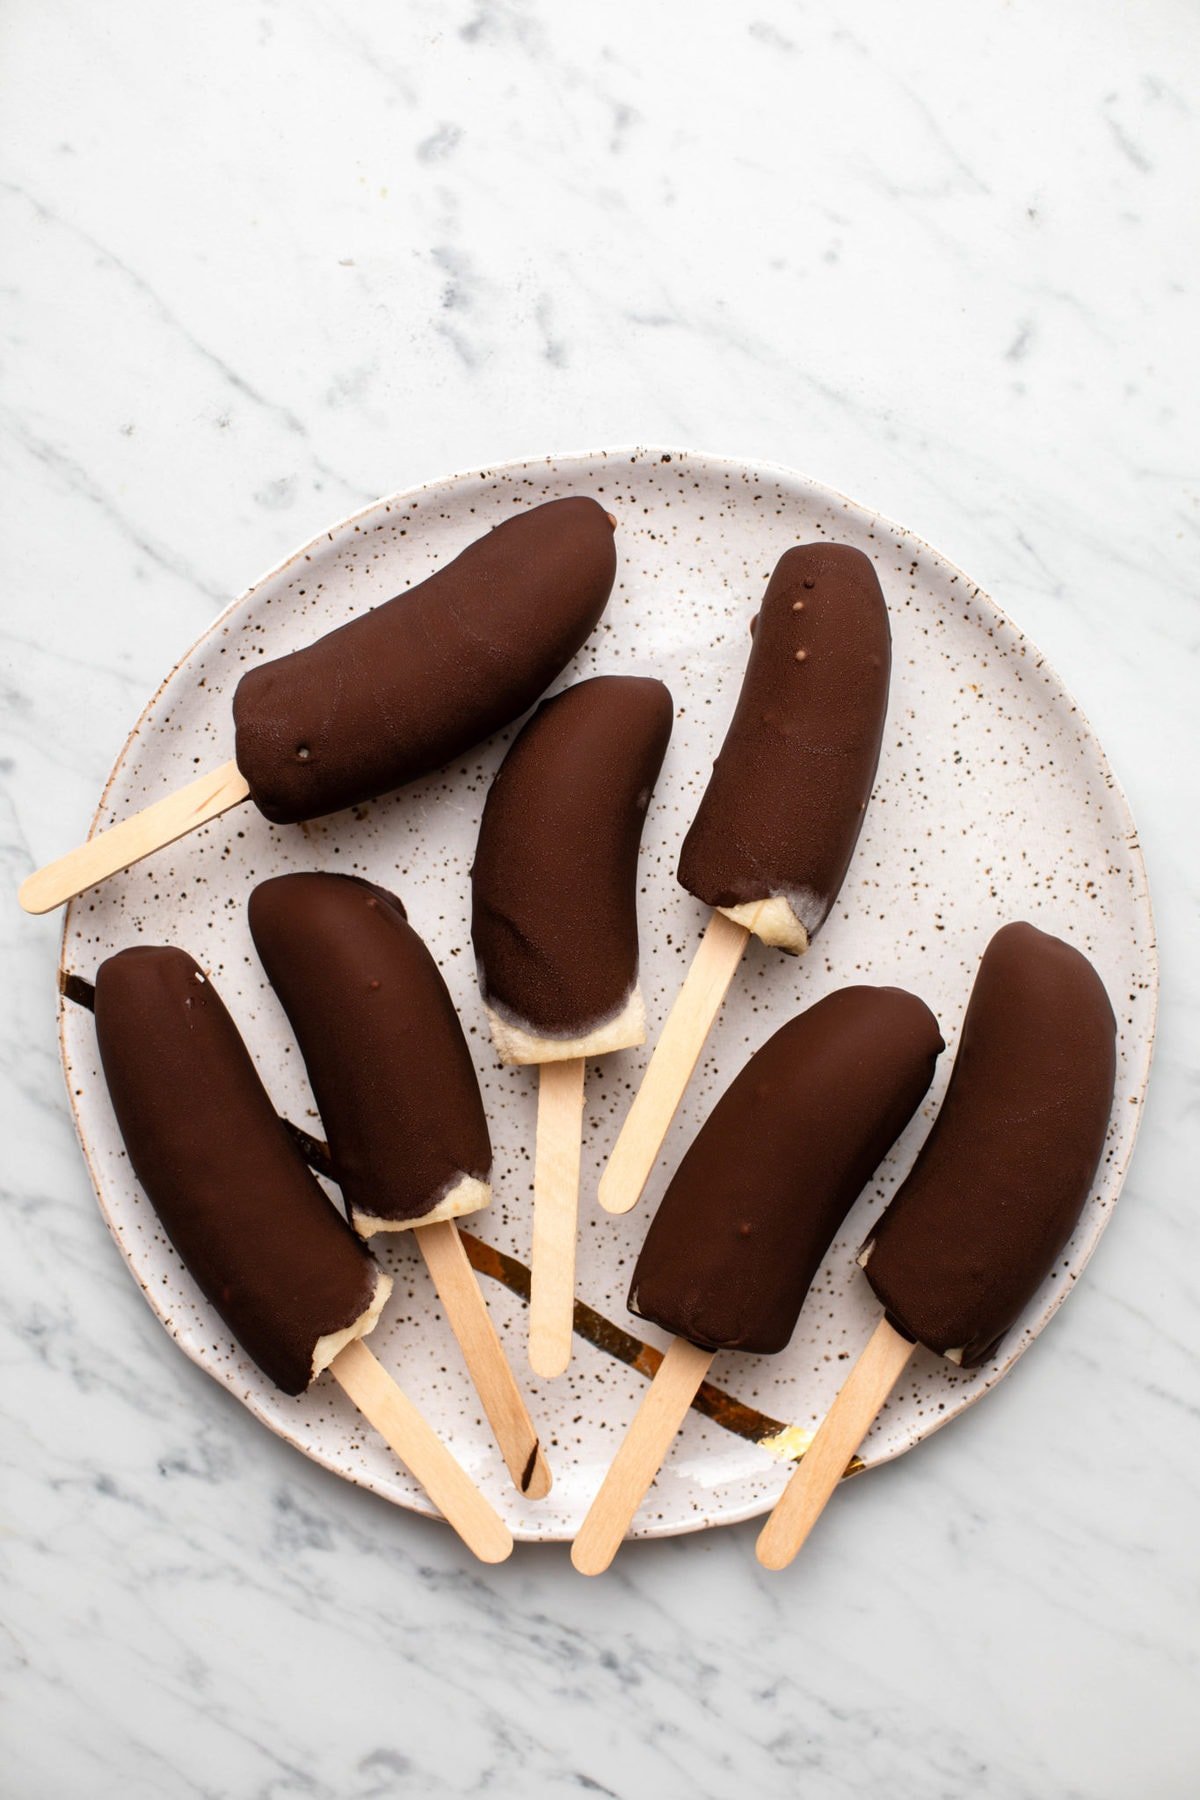 Chocolate_Covered_Banana_Pops_Vegan_GlutenFree_FromMyBowl-7 - From My Bowl